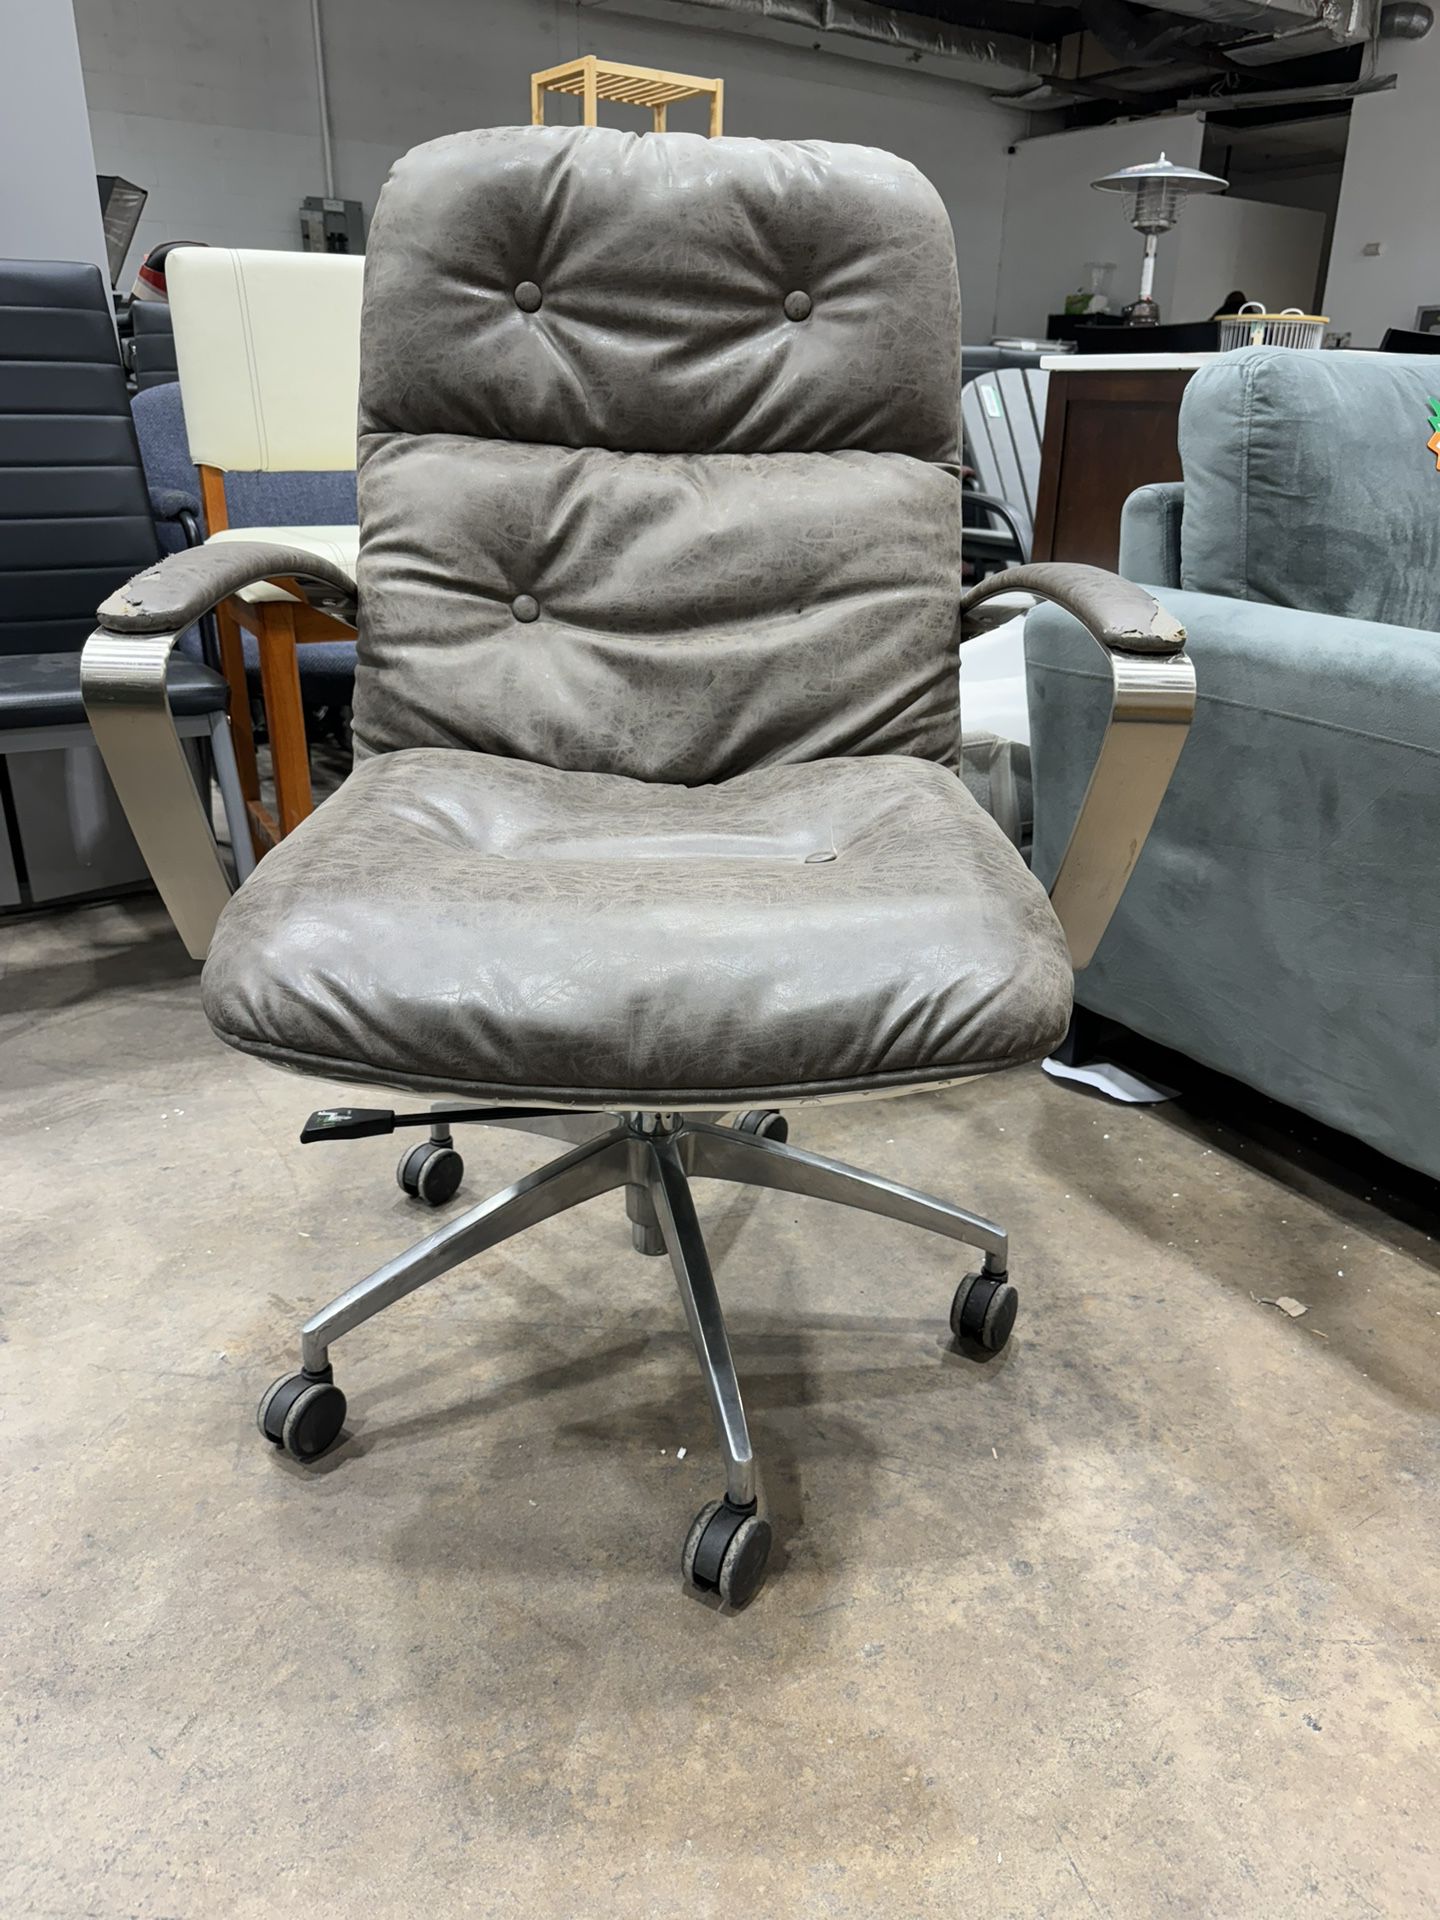 Avenue Office Chair Vintage Gray